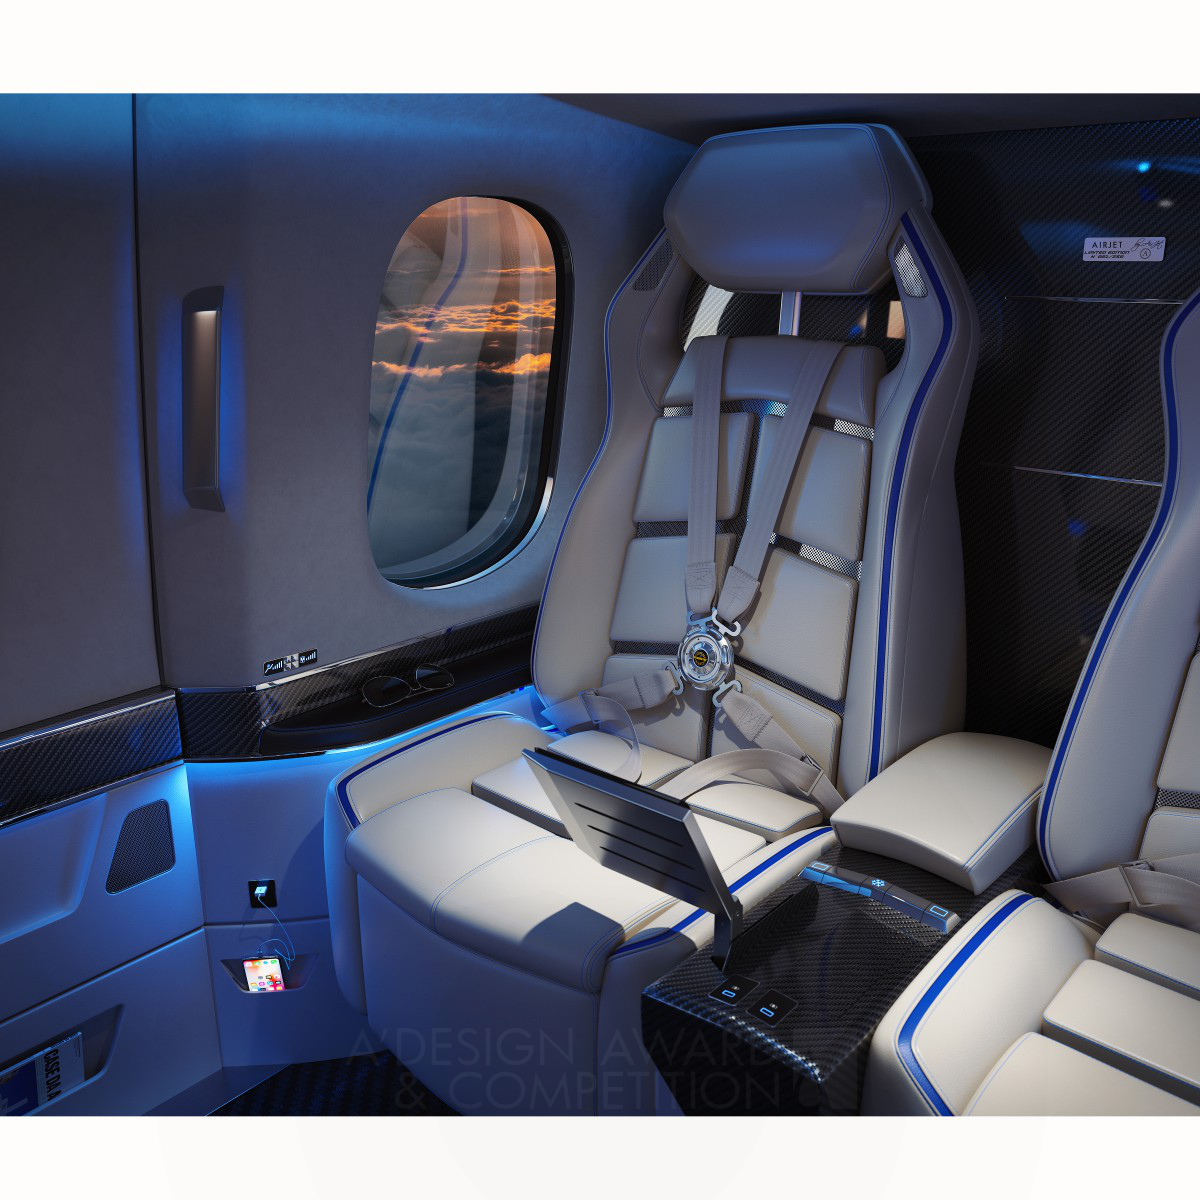 Jean-Pierre Alfano wins Golden at the prestigious A' Vehicle, Mobility and Transportation Design Award with Private Helicopter Aircraft Interior.